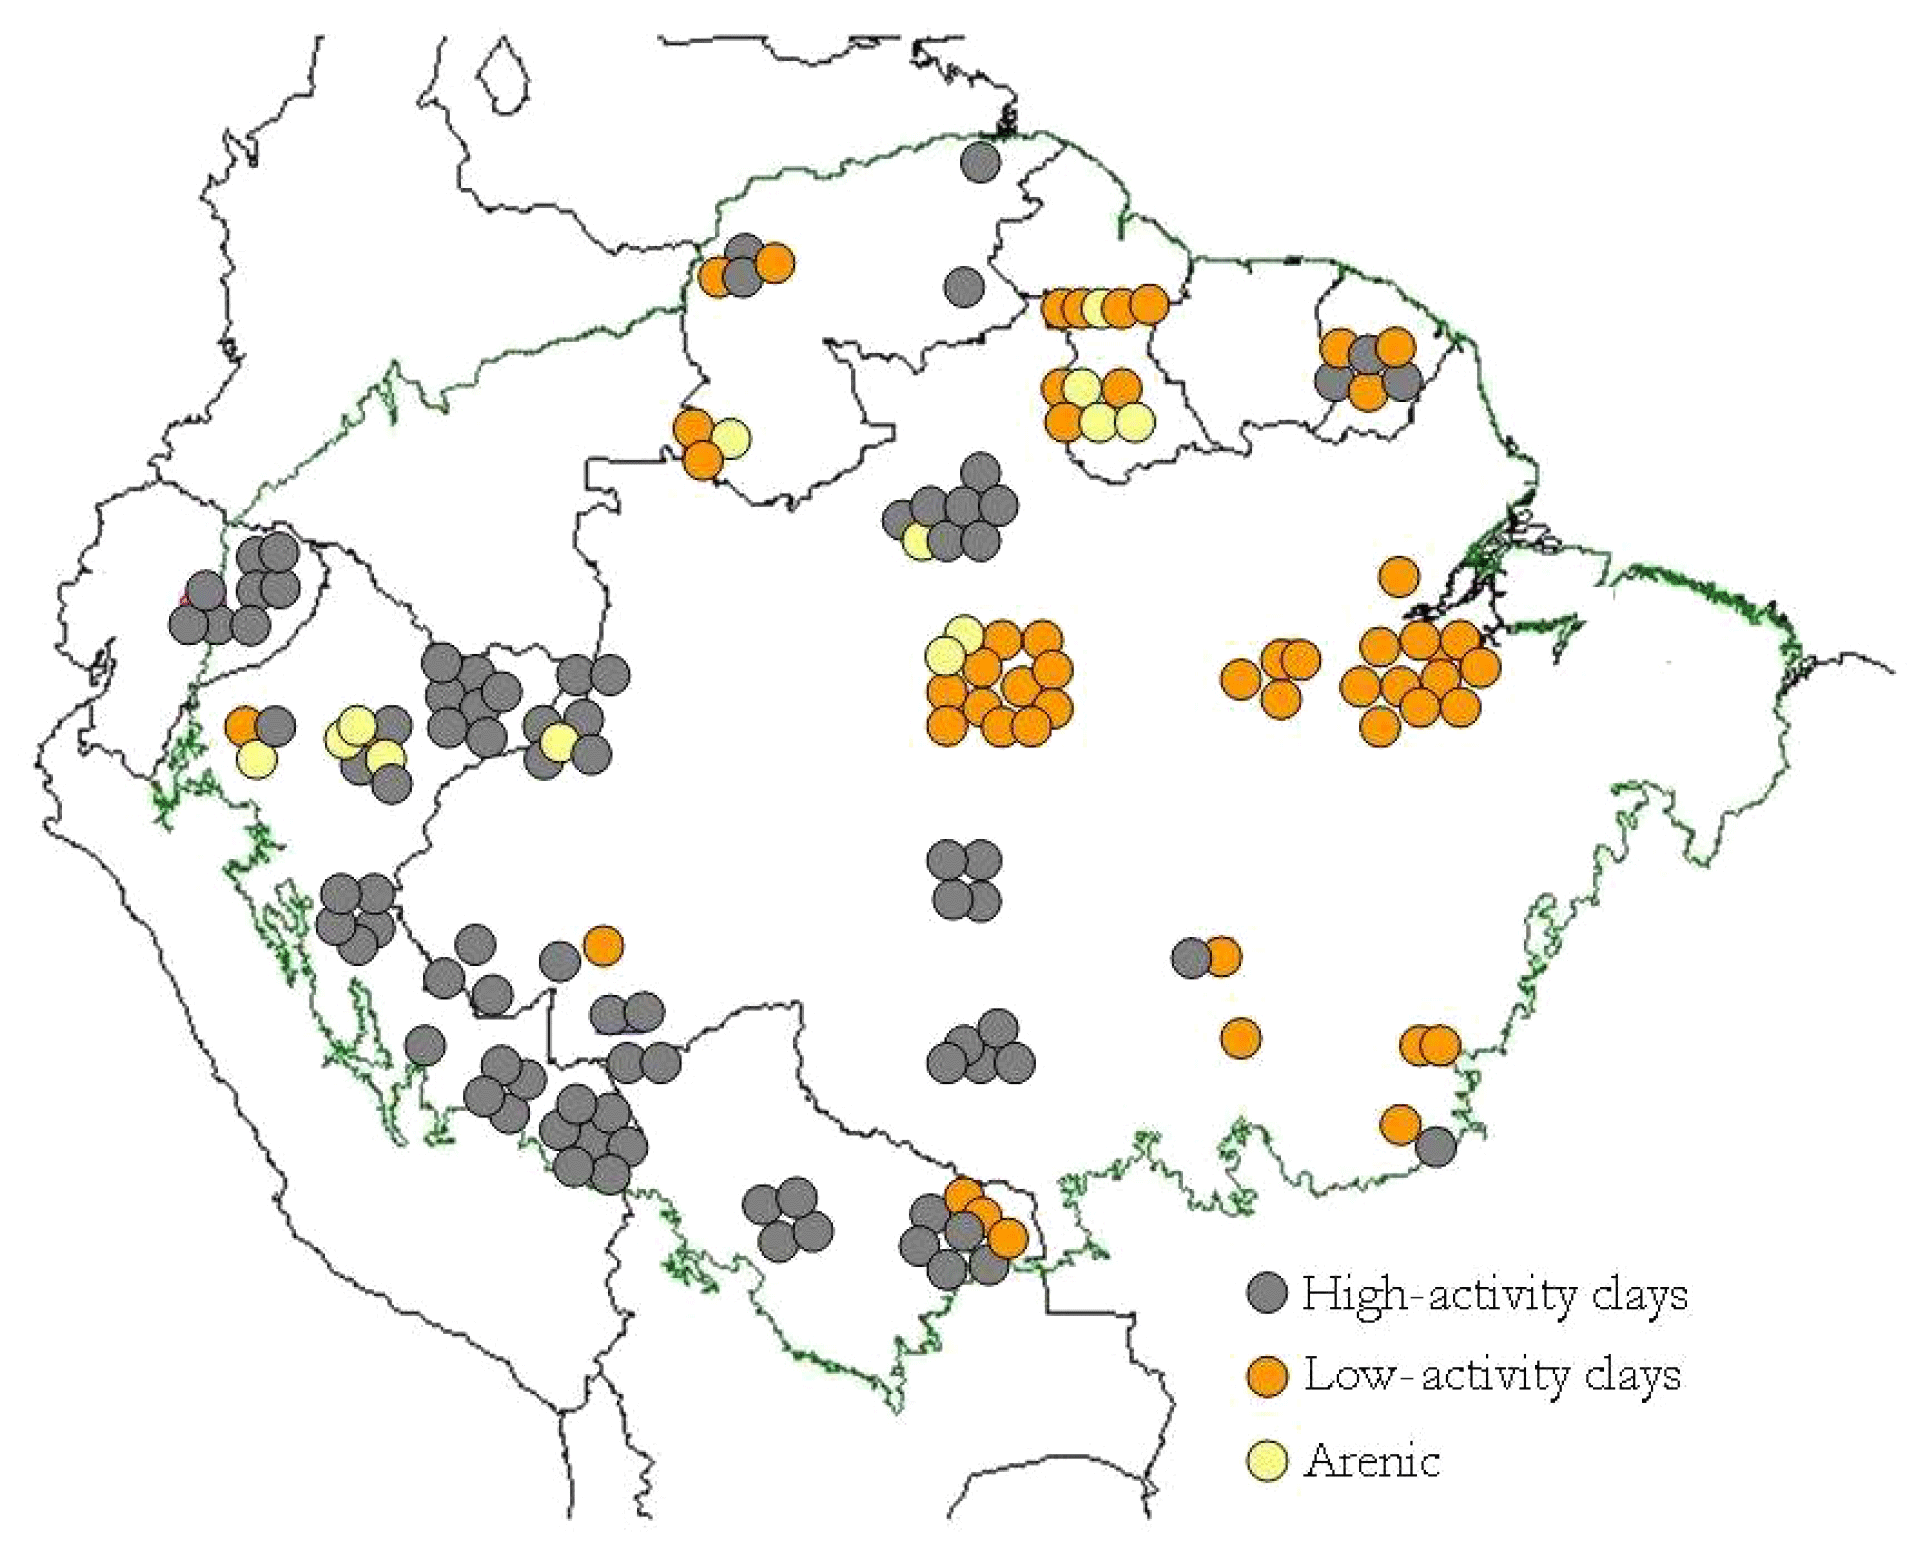 Geographic distribution of 147 study sites across the Amazon Basin, according to the different soil groups. Each point is a 1 ha forest inventory permanent plot. Geographical locations have been manipulated in the map to allow visualisation of site clusters at this scale.